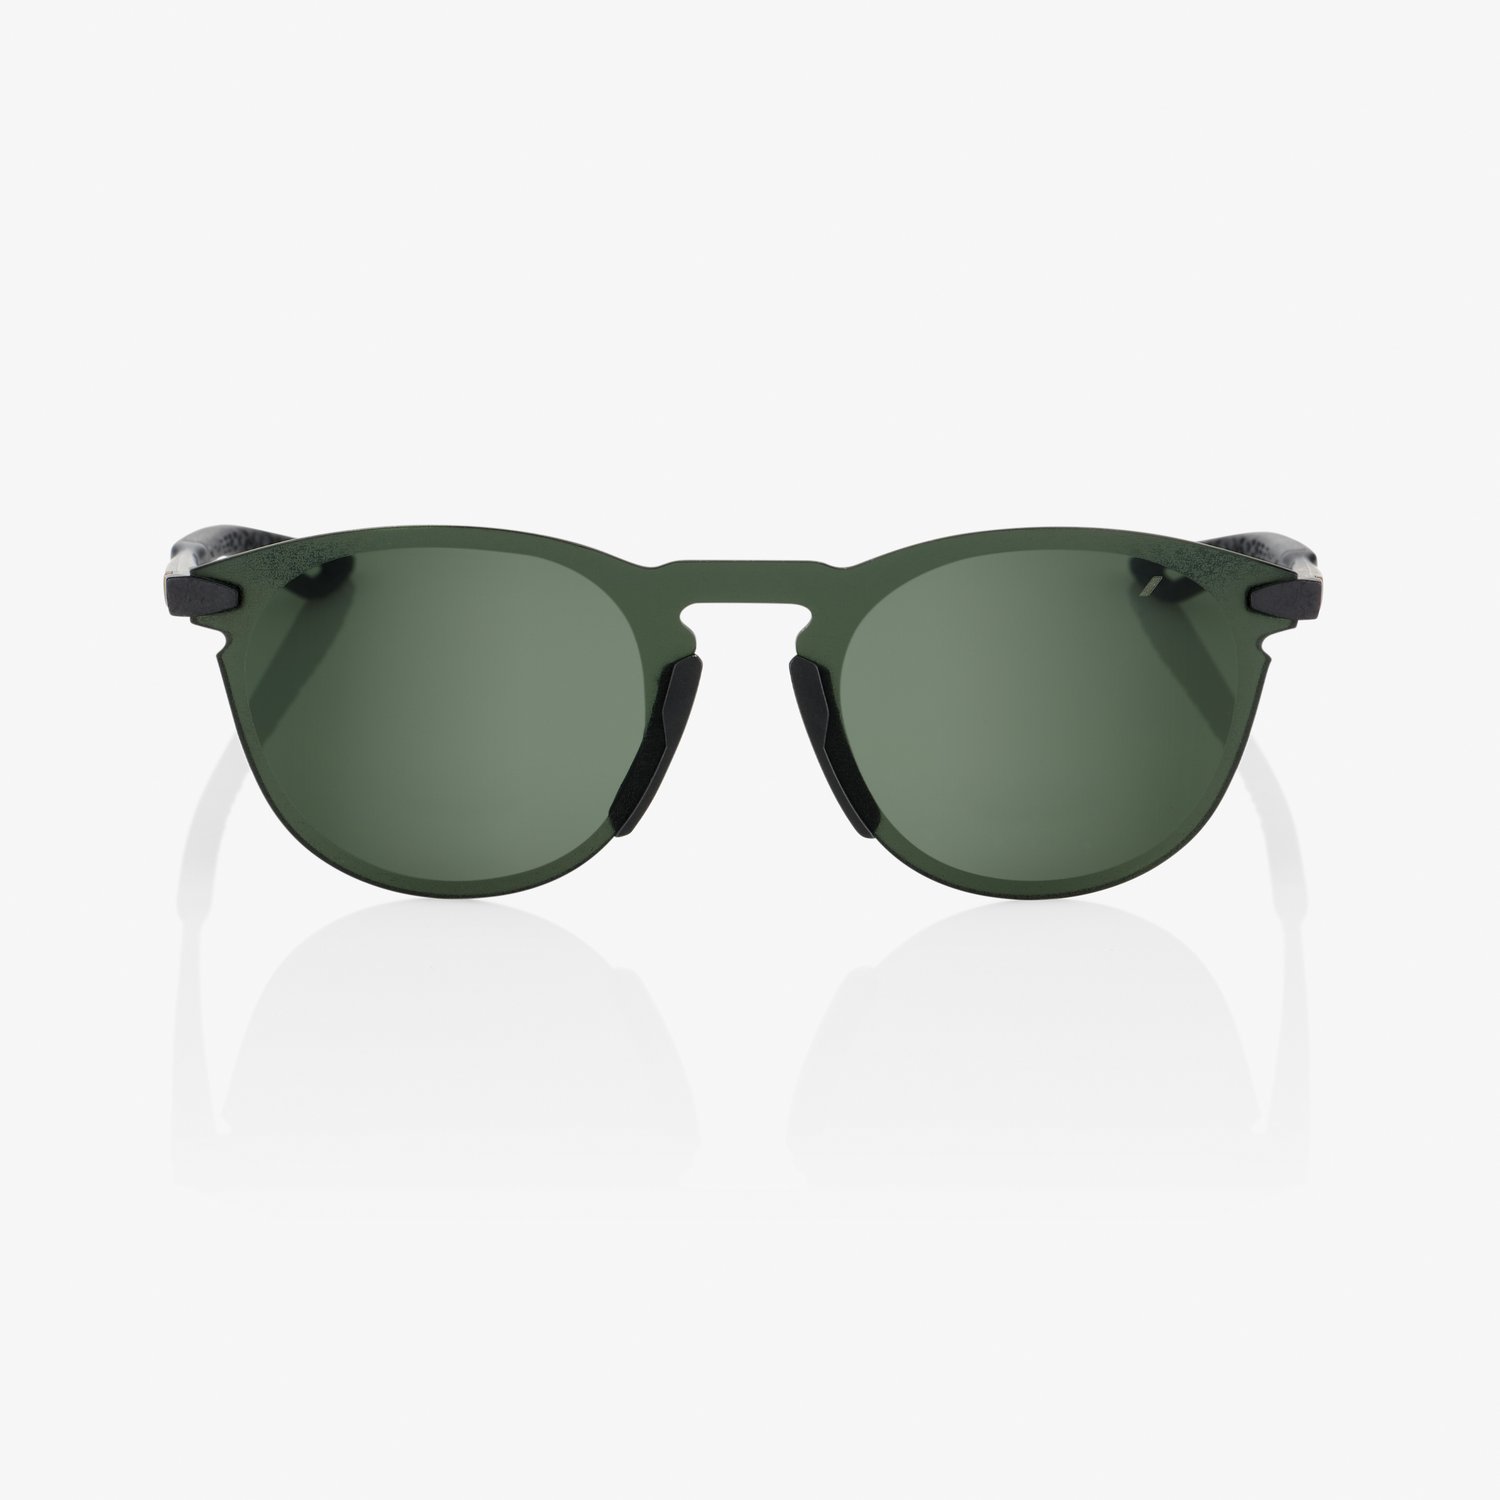 100% Legere Round Sunglasses Green w/Gray Lens - image 2 of 3